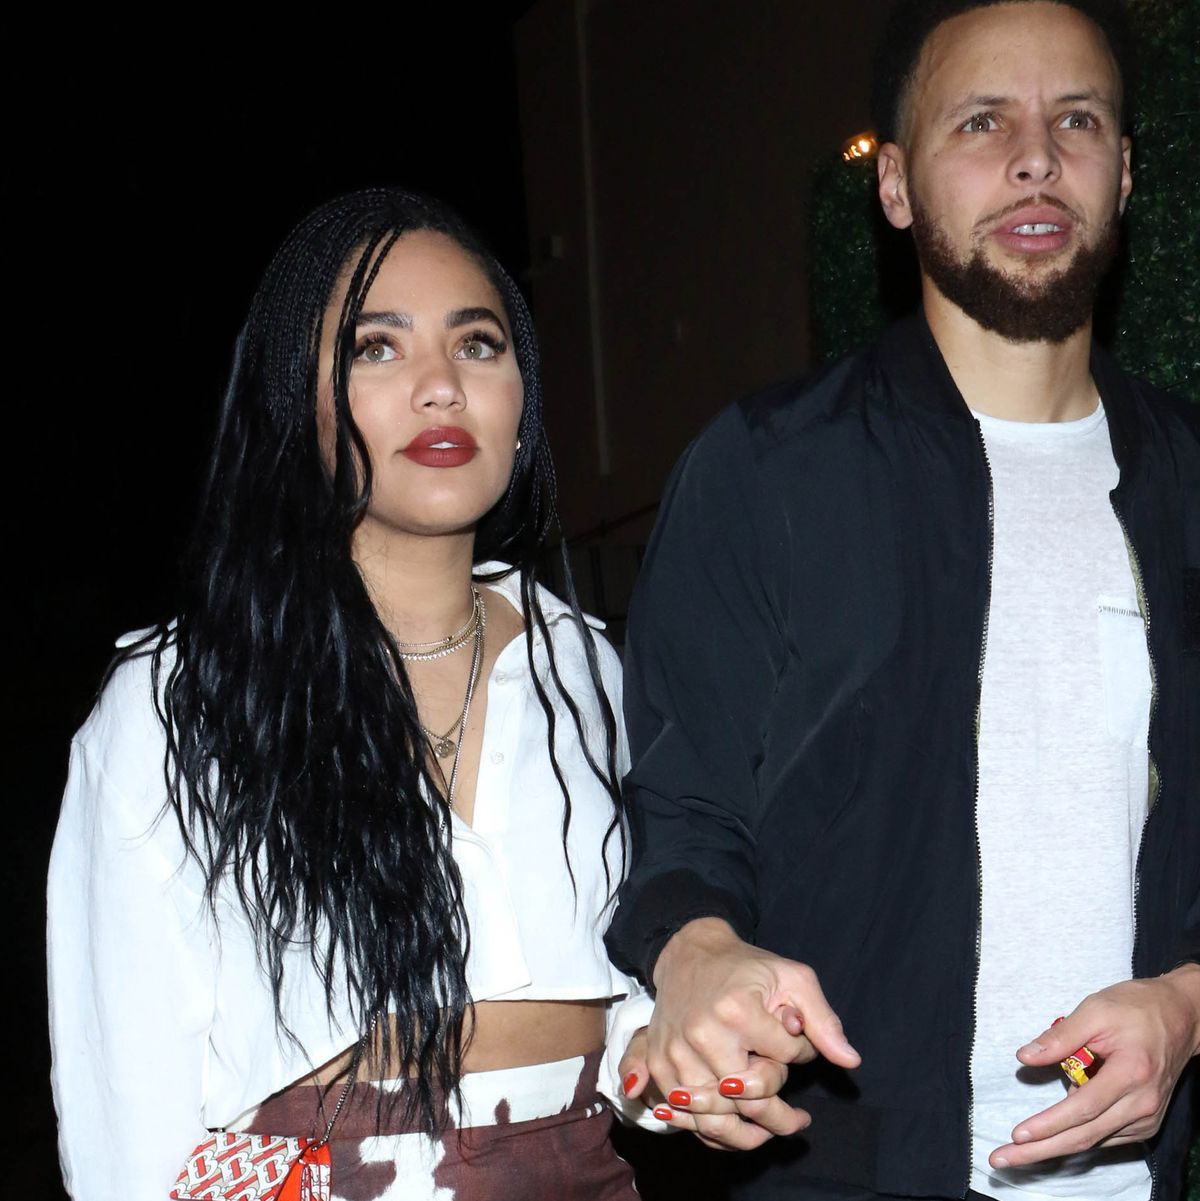 Ayesha Curry Ditching The Blonde Bombshell Look, Instagram Disapproves -  The Blast